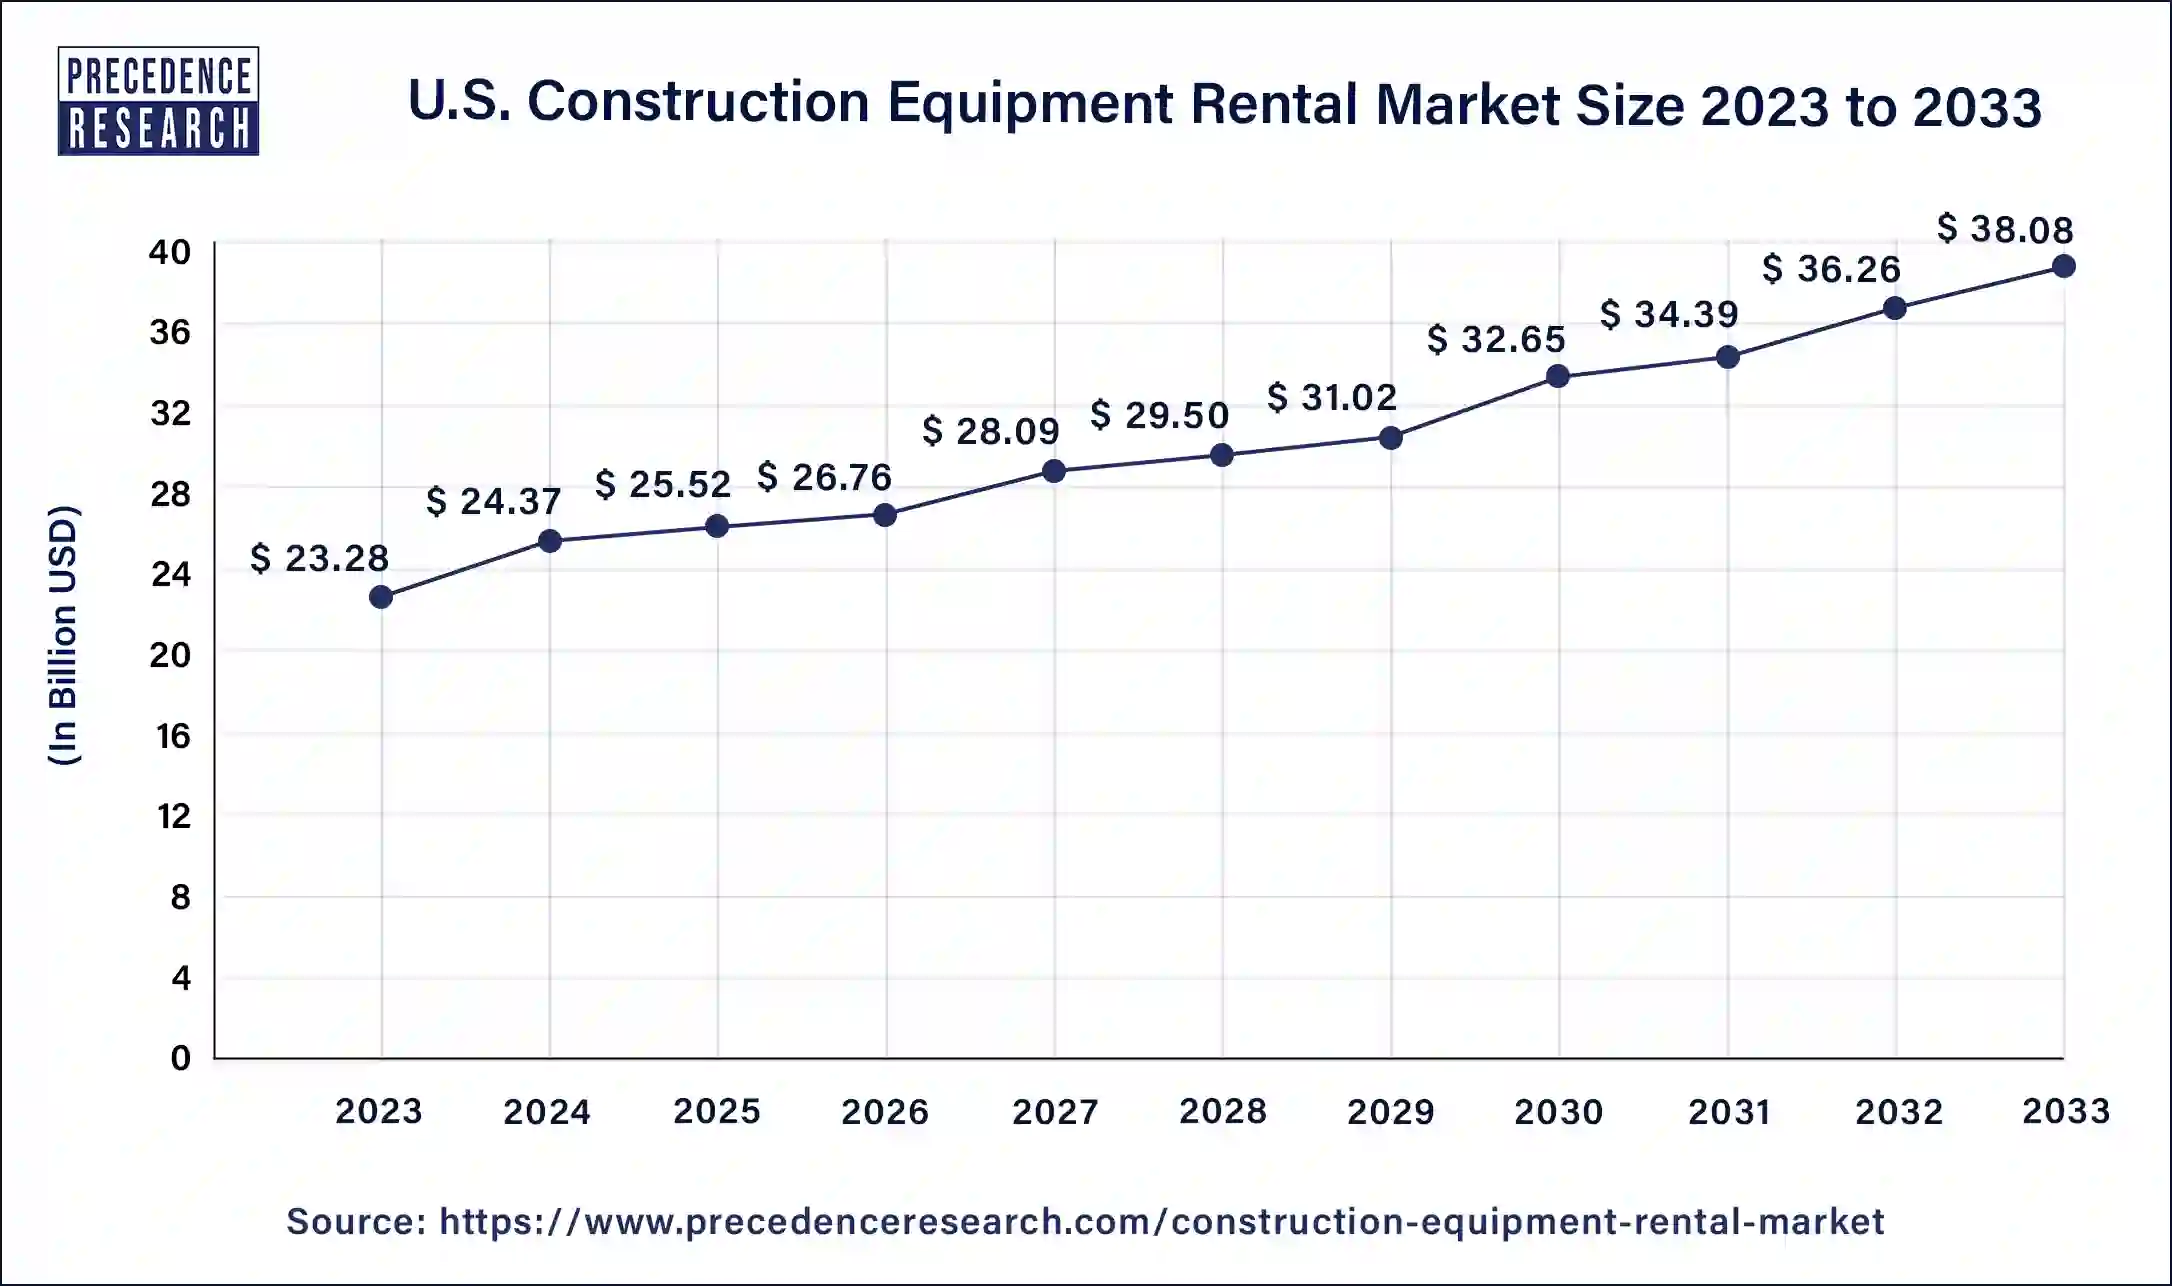 Asia Pacific Construction Equipment Rental Market Size 2024 To 2033